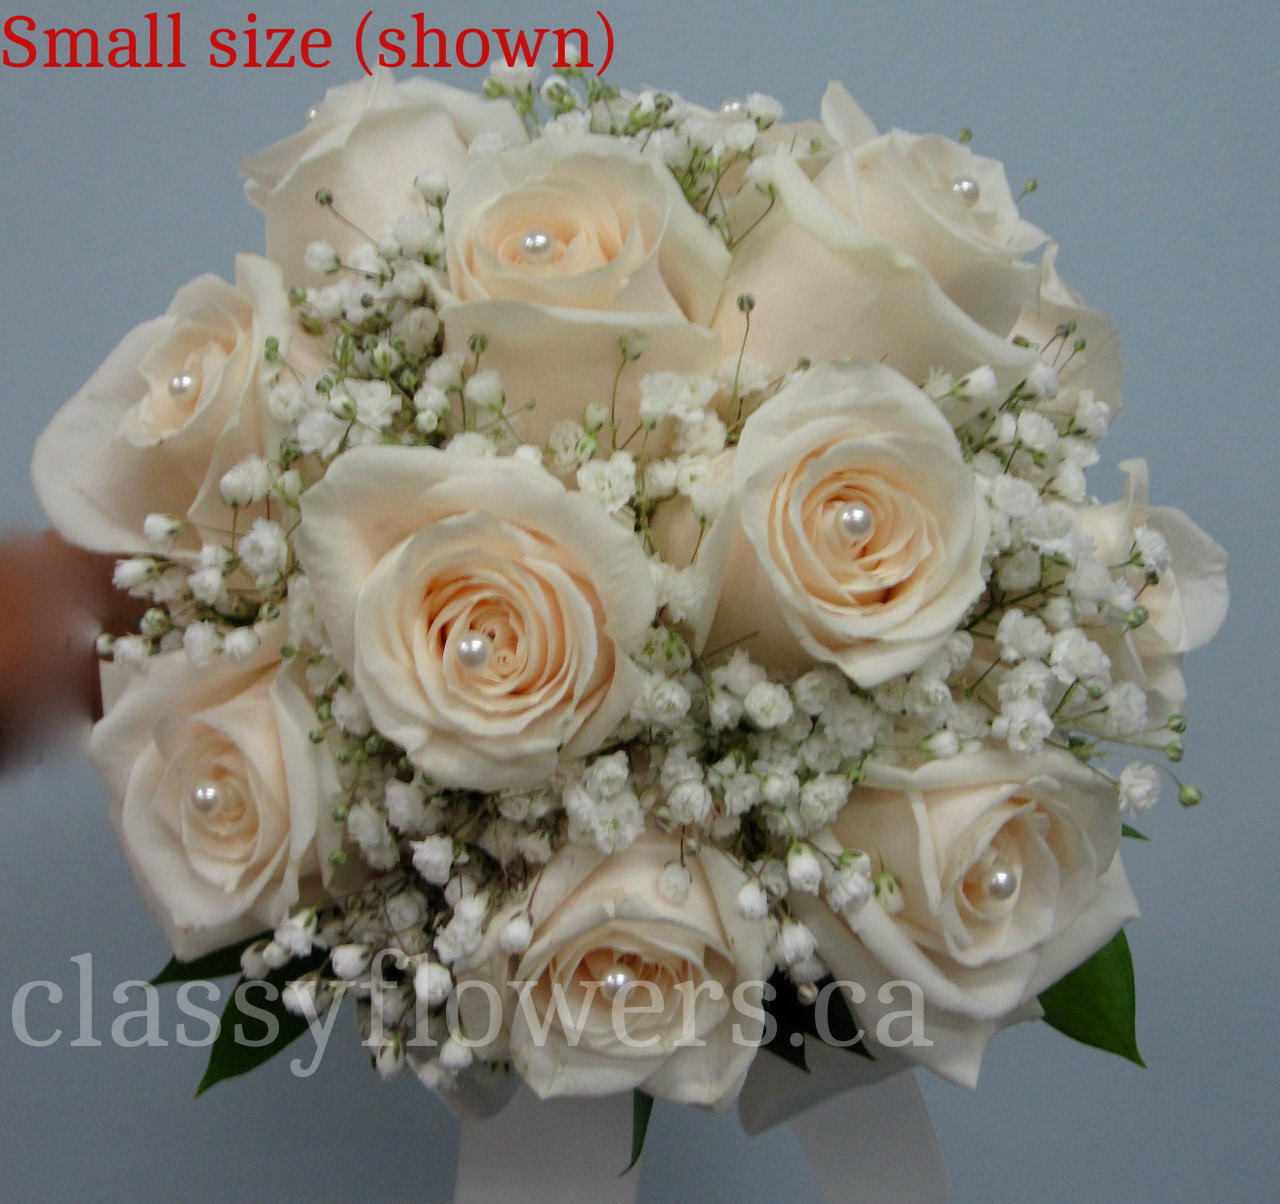 Bridal Bouquet - Recommendations For a Florist In Vaughan or nearby 1